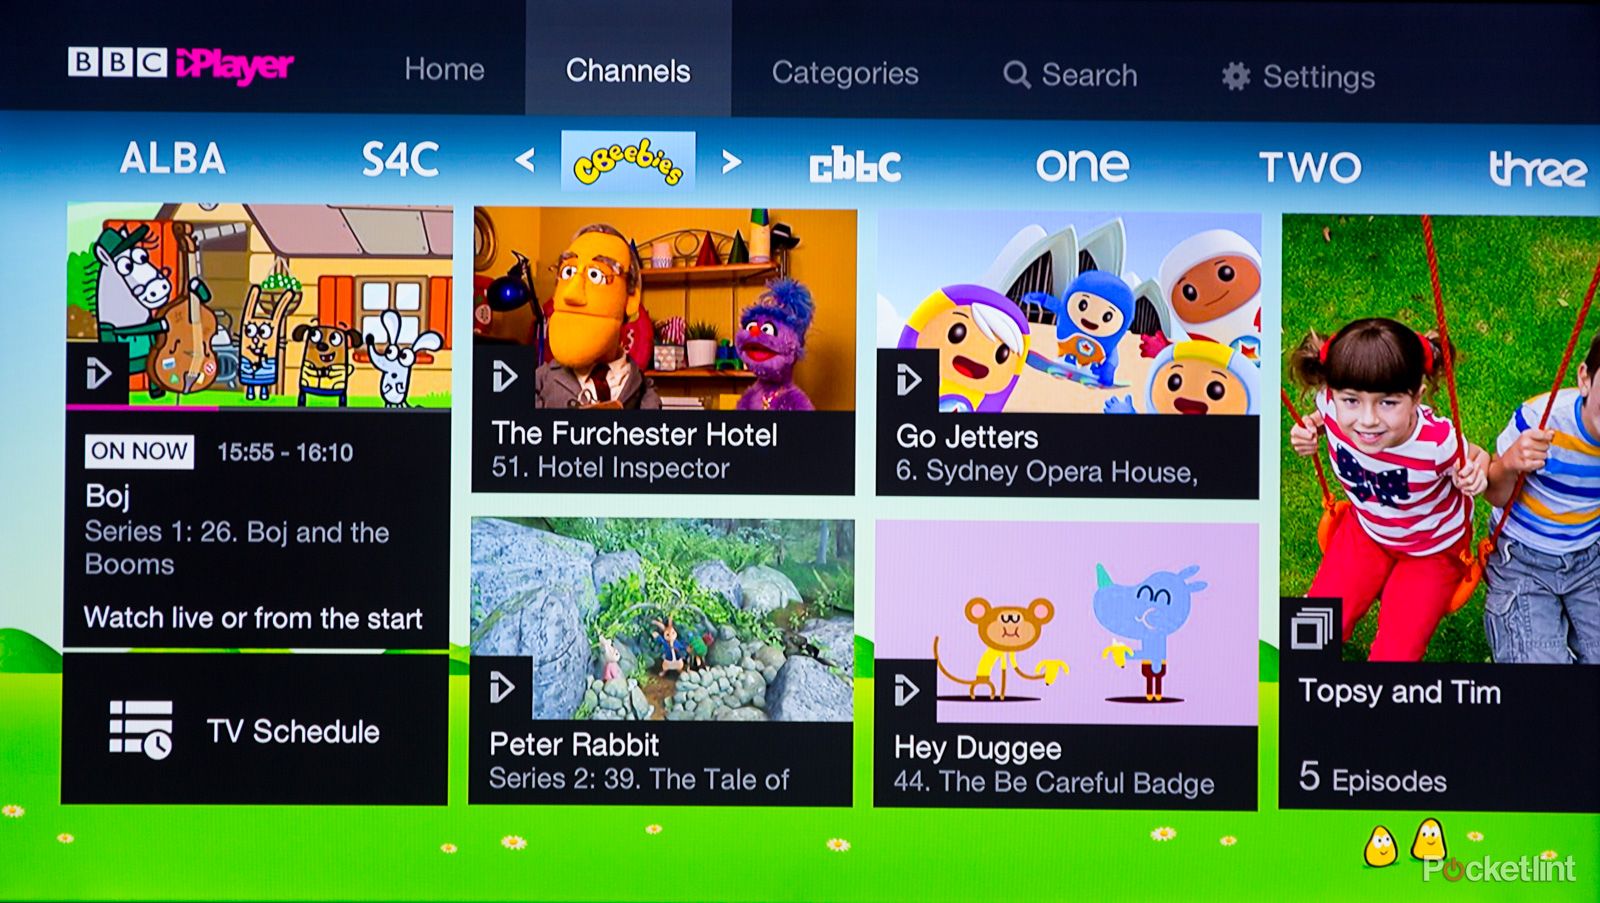 10 best streaming services for kids bbc iplayer pokemon angry birds and more image 10